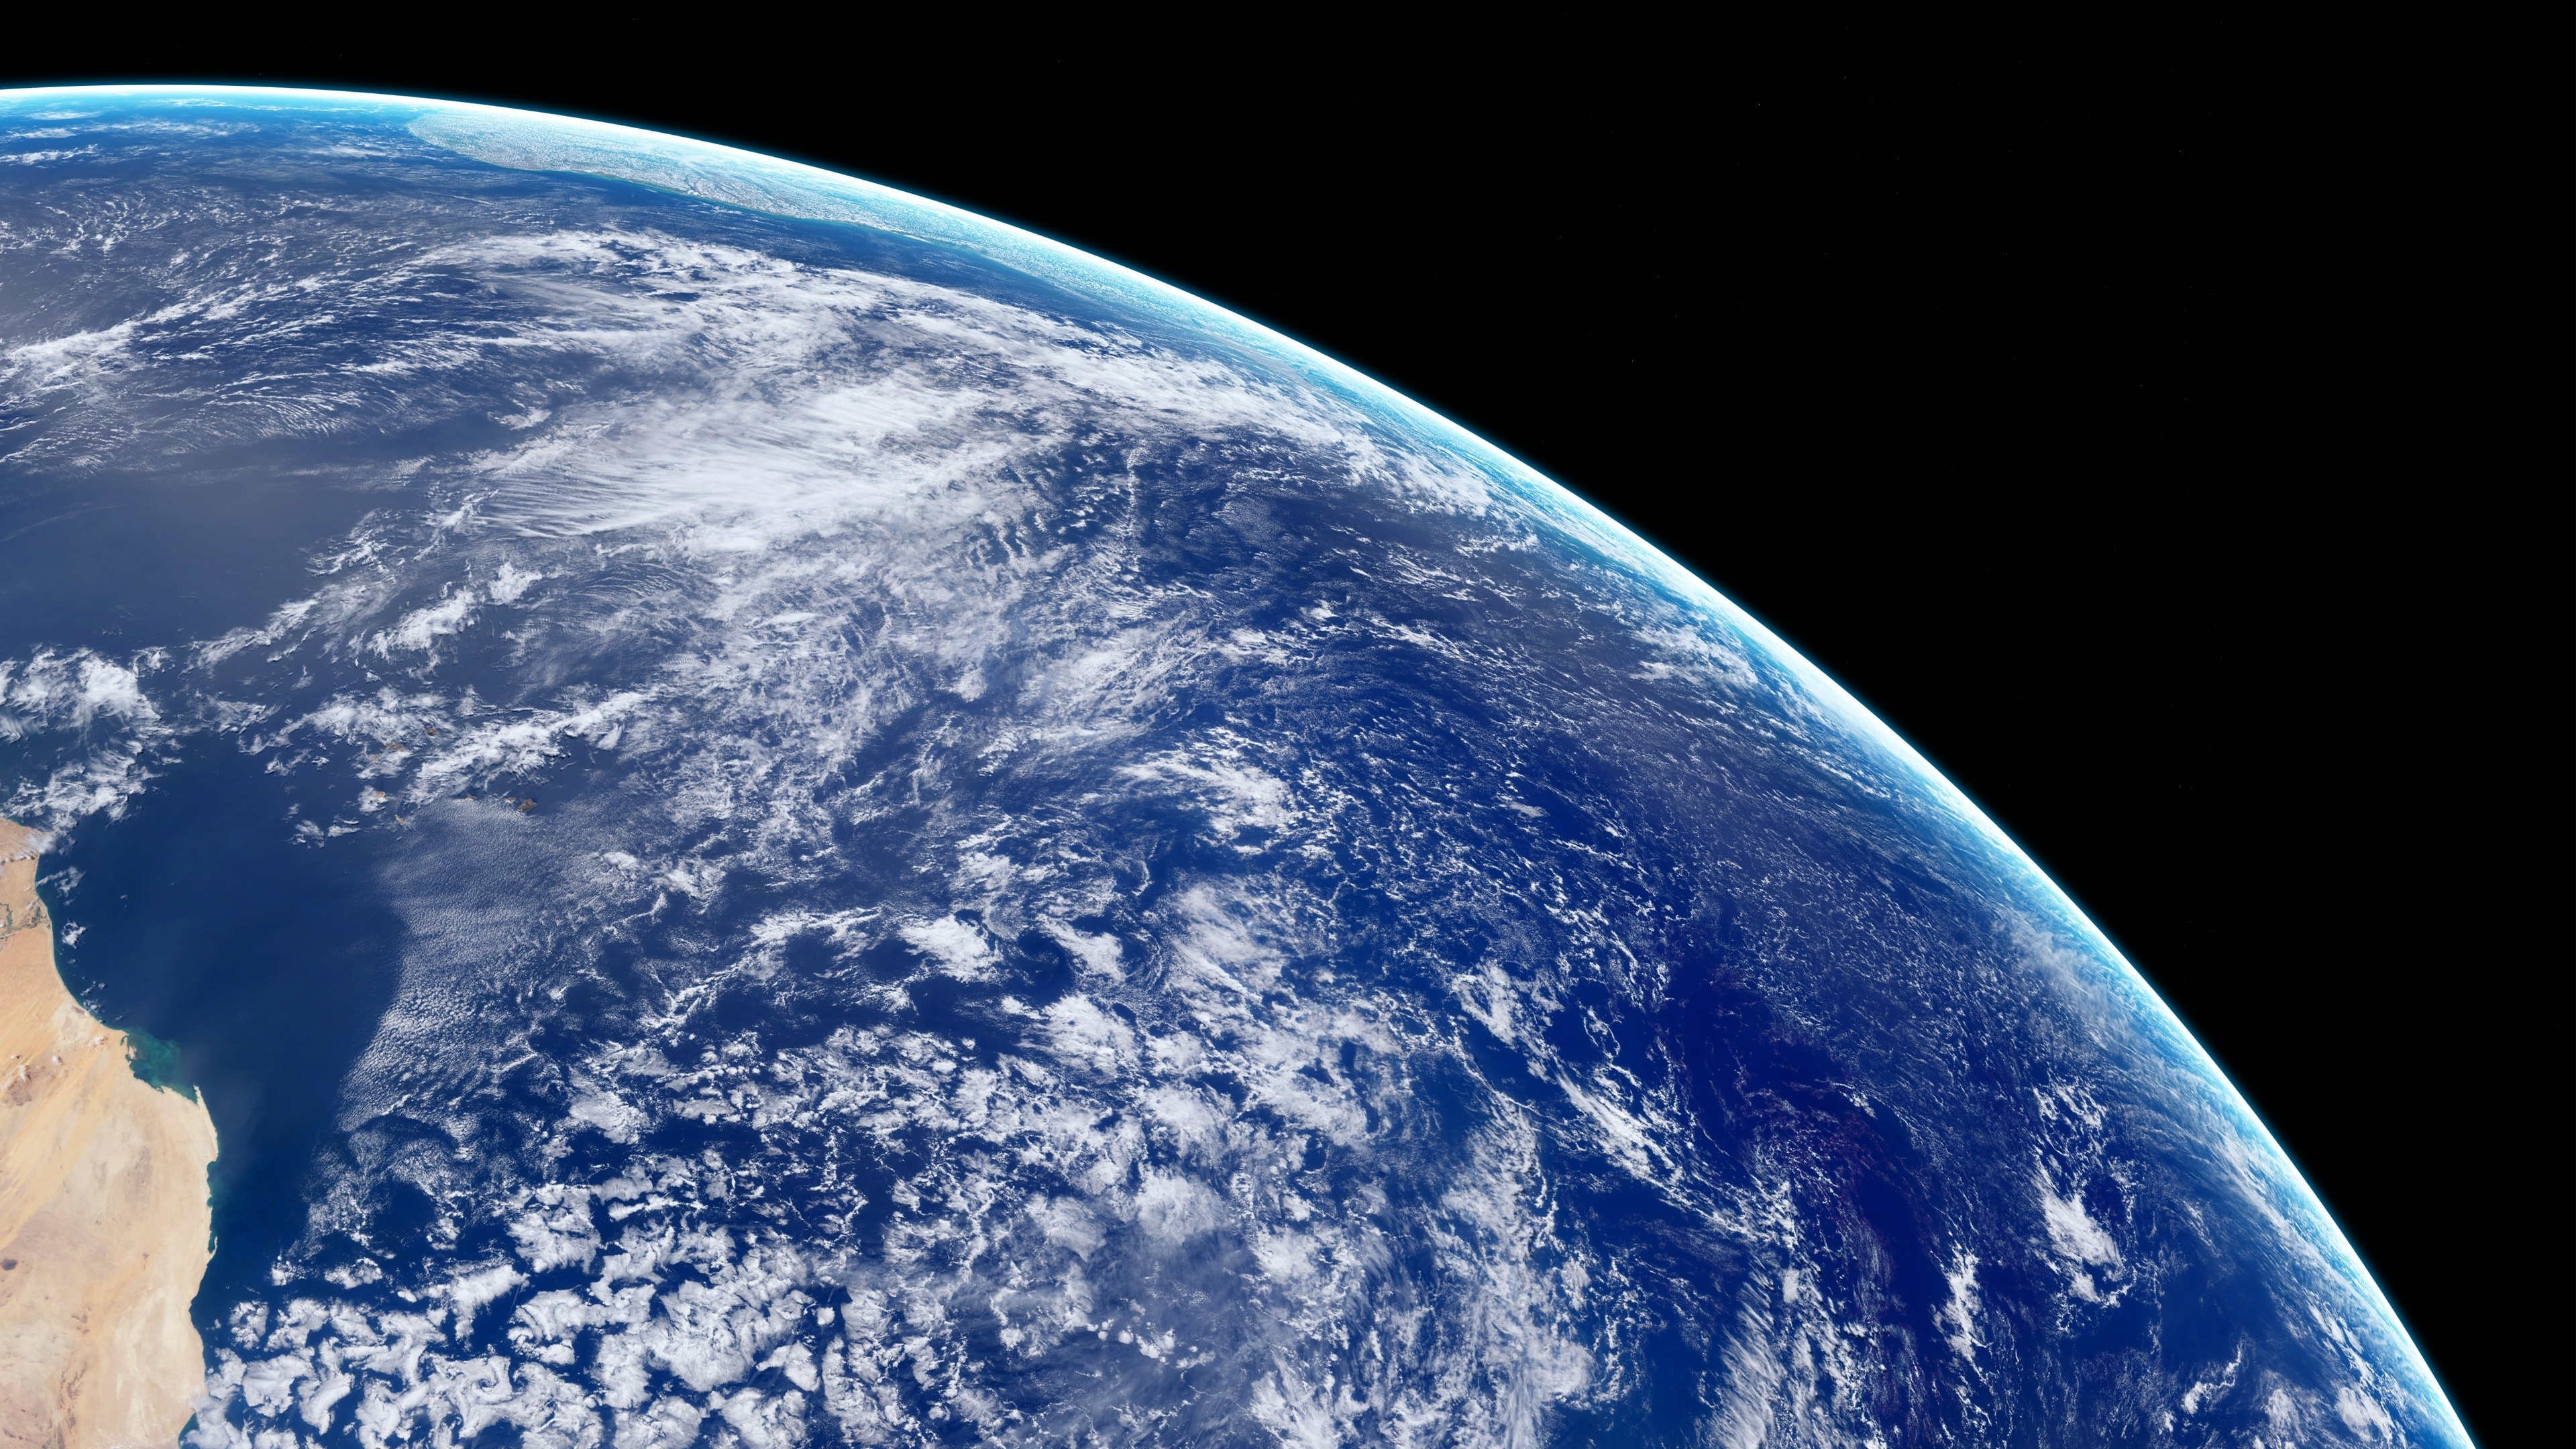 Download wallpaper 3840x2160 clouds, earth, view from space 4k